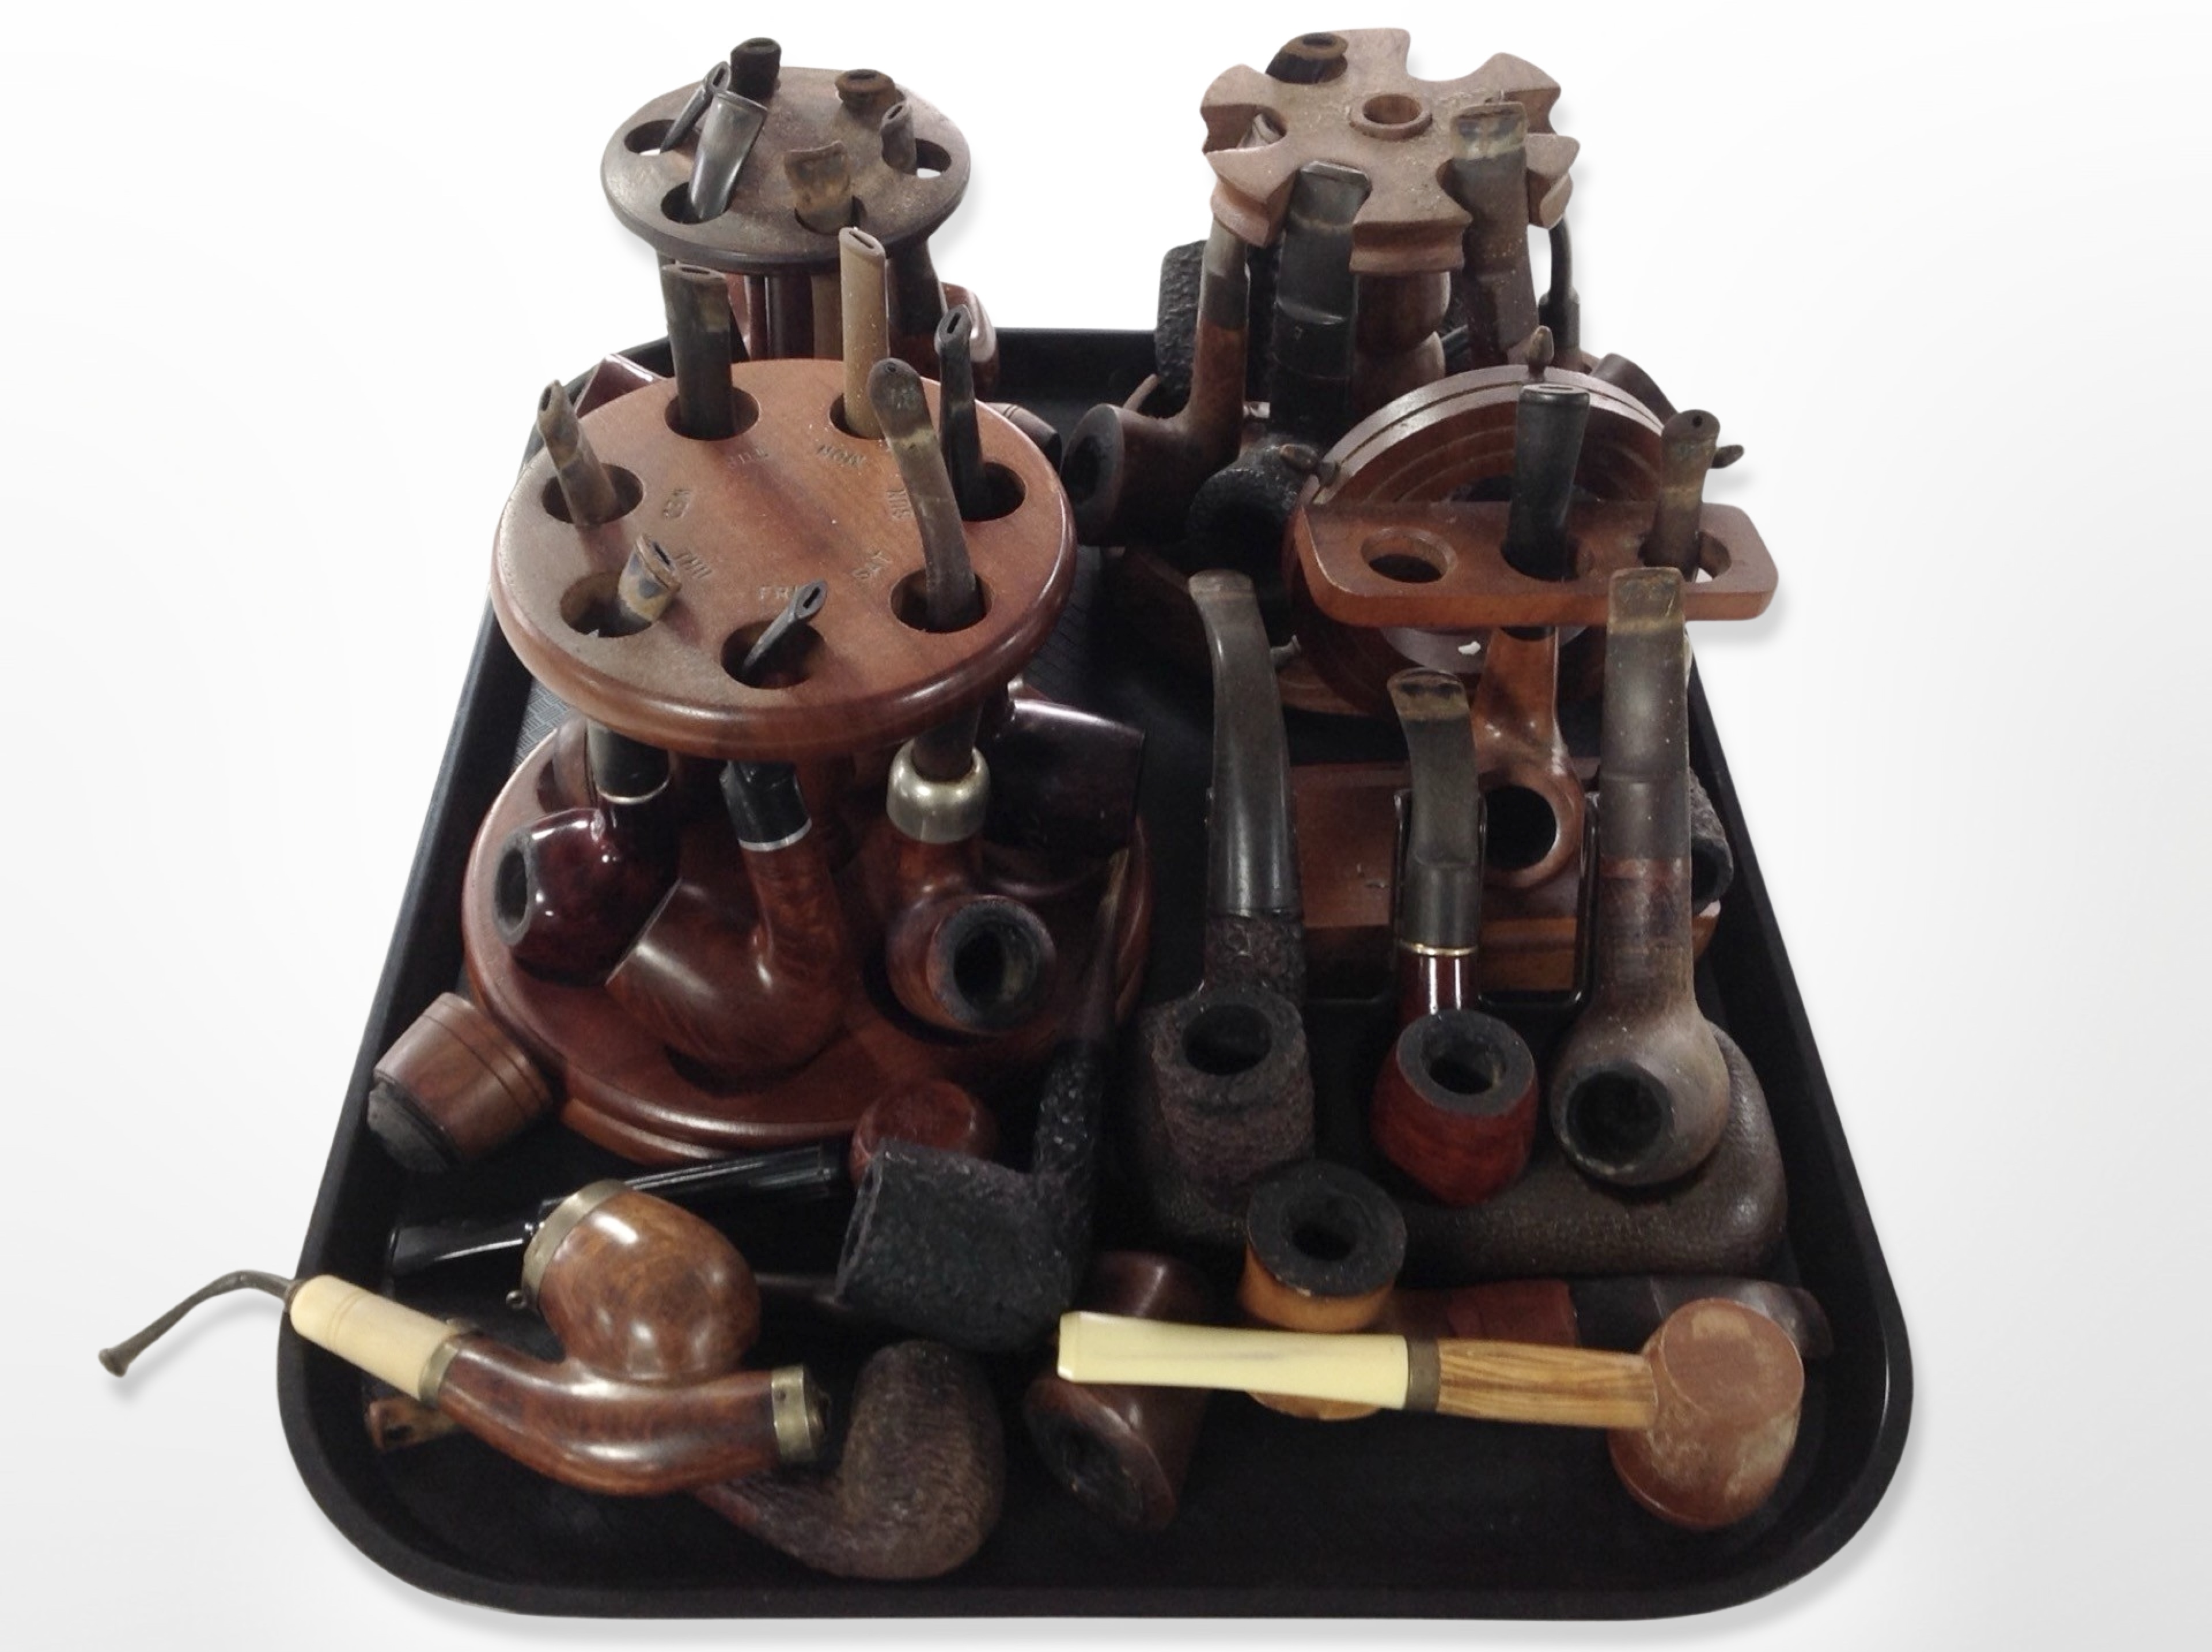 A collection of pipes on racks